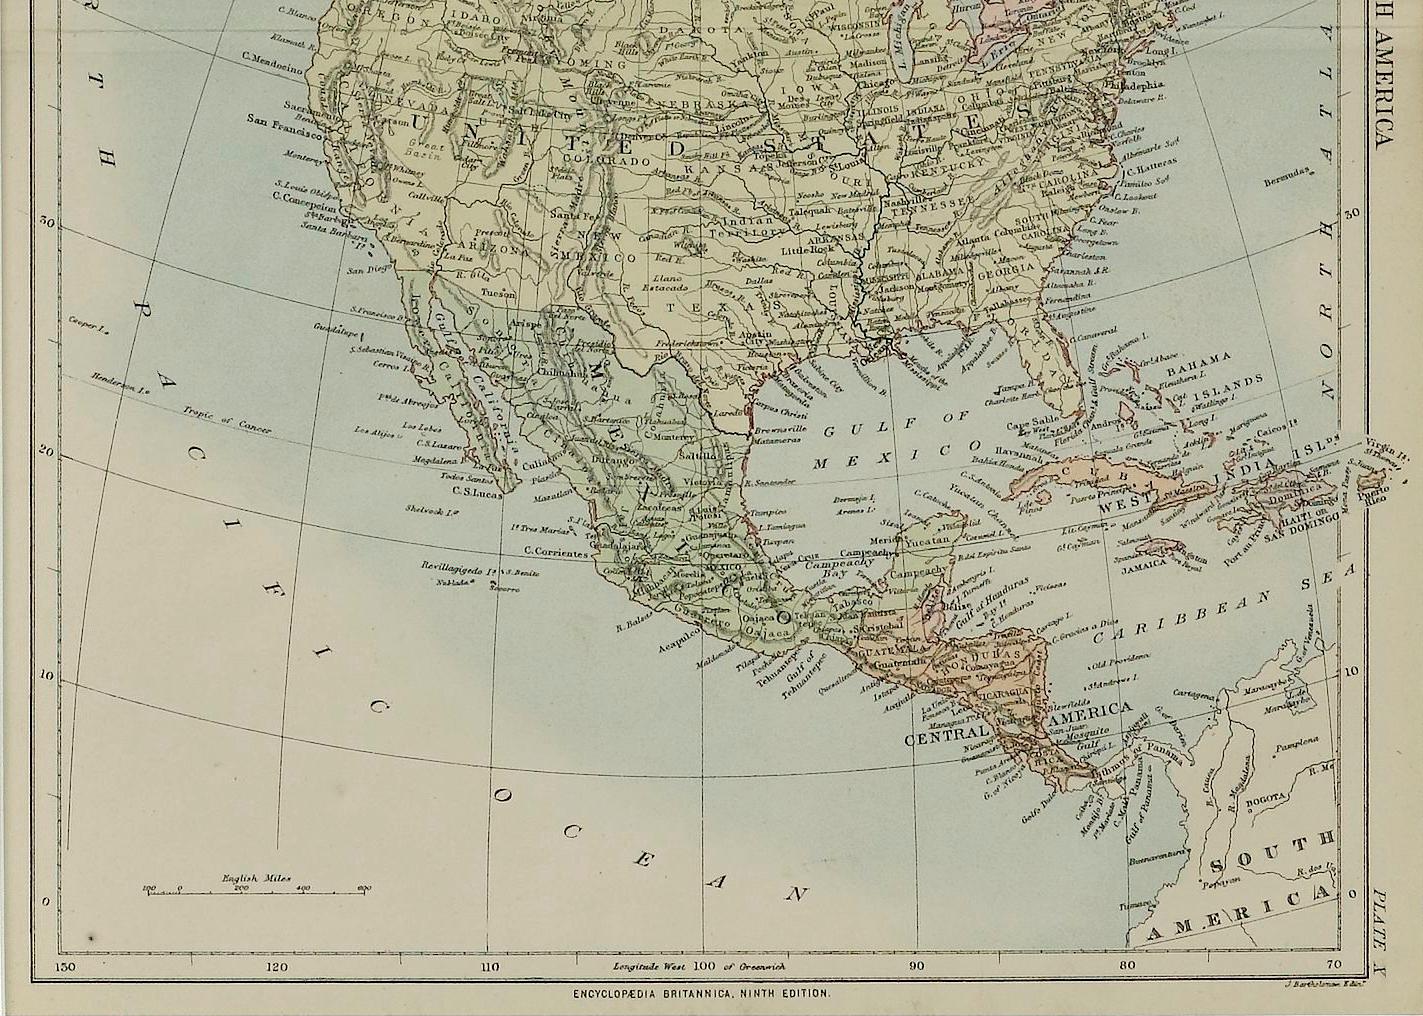 Presented is an original 1875 map of “North America.” The map was issued in Volume 1 of the Ninth Edition of the Encyclopædia Britannica, published in Edinburgh. The map was drawn by famous Scottish mapmaker John Bartholomew. The map depicts North